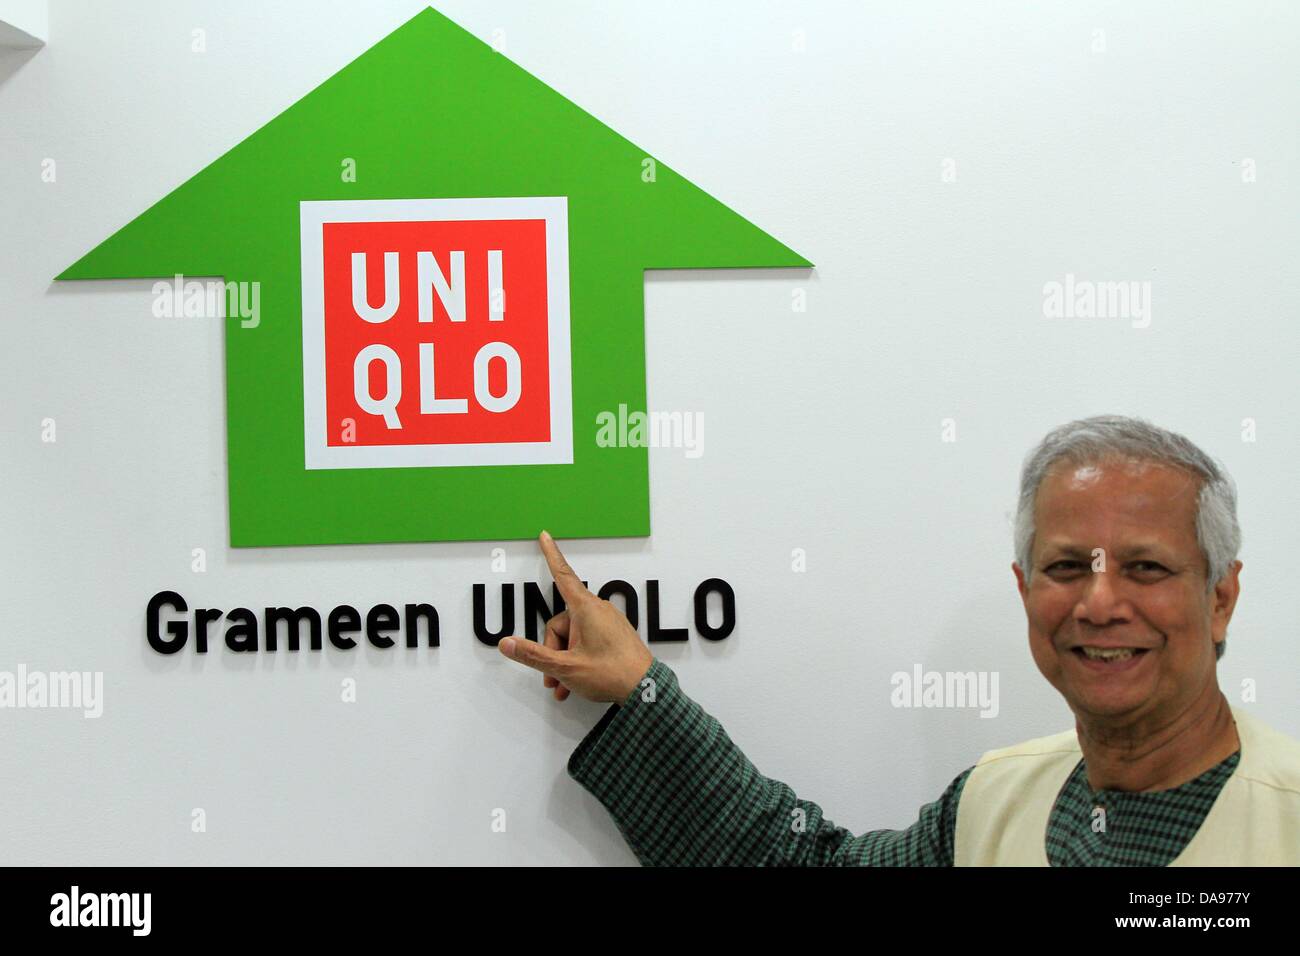 Dhaka, Bangladesh.  8th July, 2013. Nobel Laureate Dr Muhammad Yunus posed with some new dress Grameen UNIQLO stall at at Elephant Road in the city Dhaka. Grameen UNIQLO's objective is to address issues related to poverty, public sanitation, education, gender issues and the environment, by establishing a sustainable, community-level business cycle. Local involvement in the design, production and sale of clothing provides jobs, while helping to develop the economy and improve the quality of life in the country. Stock Photo